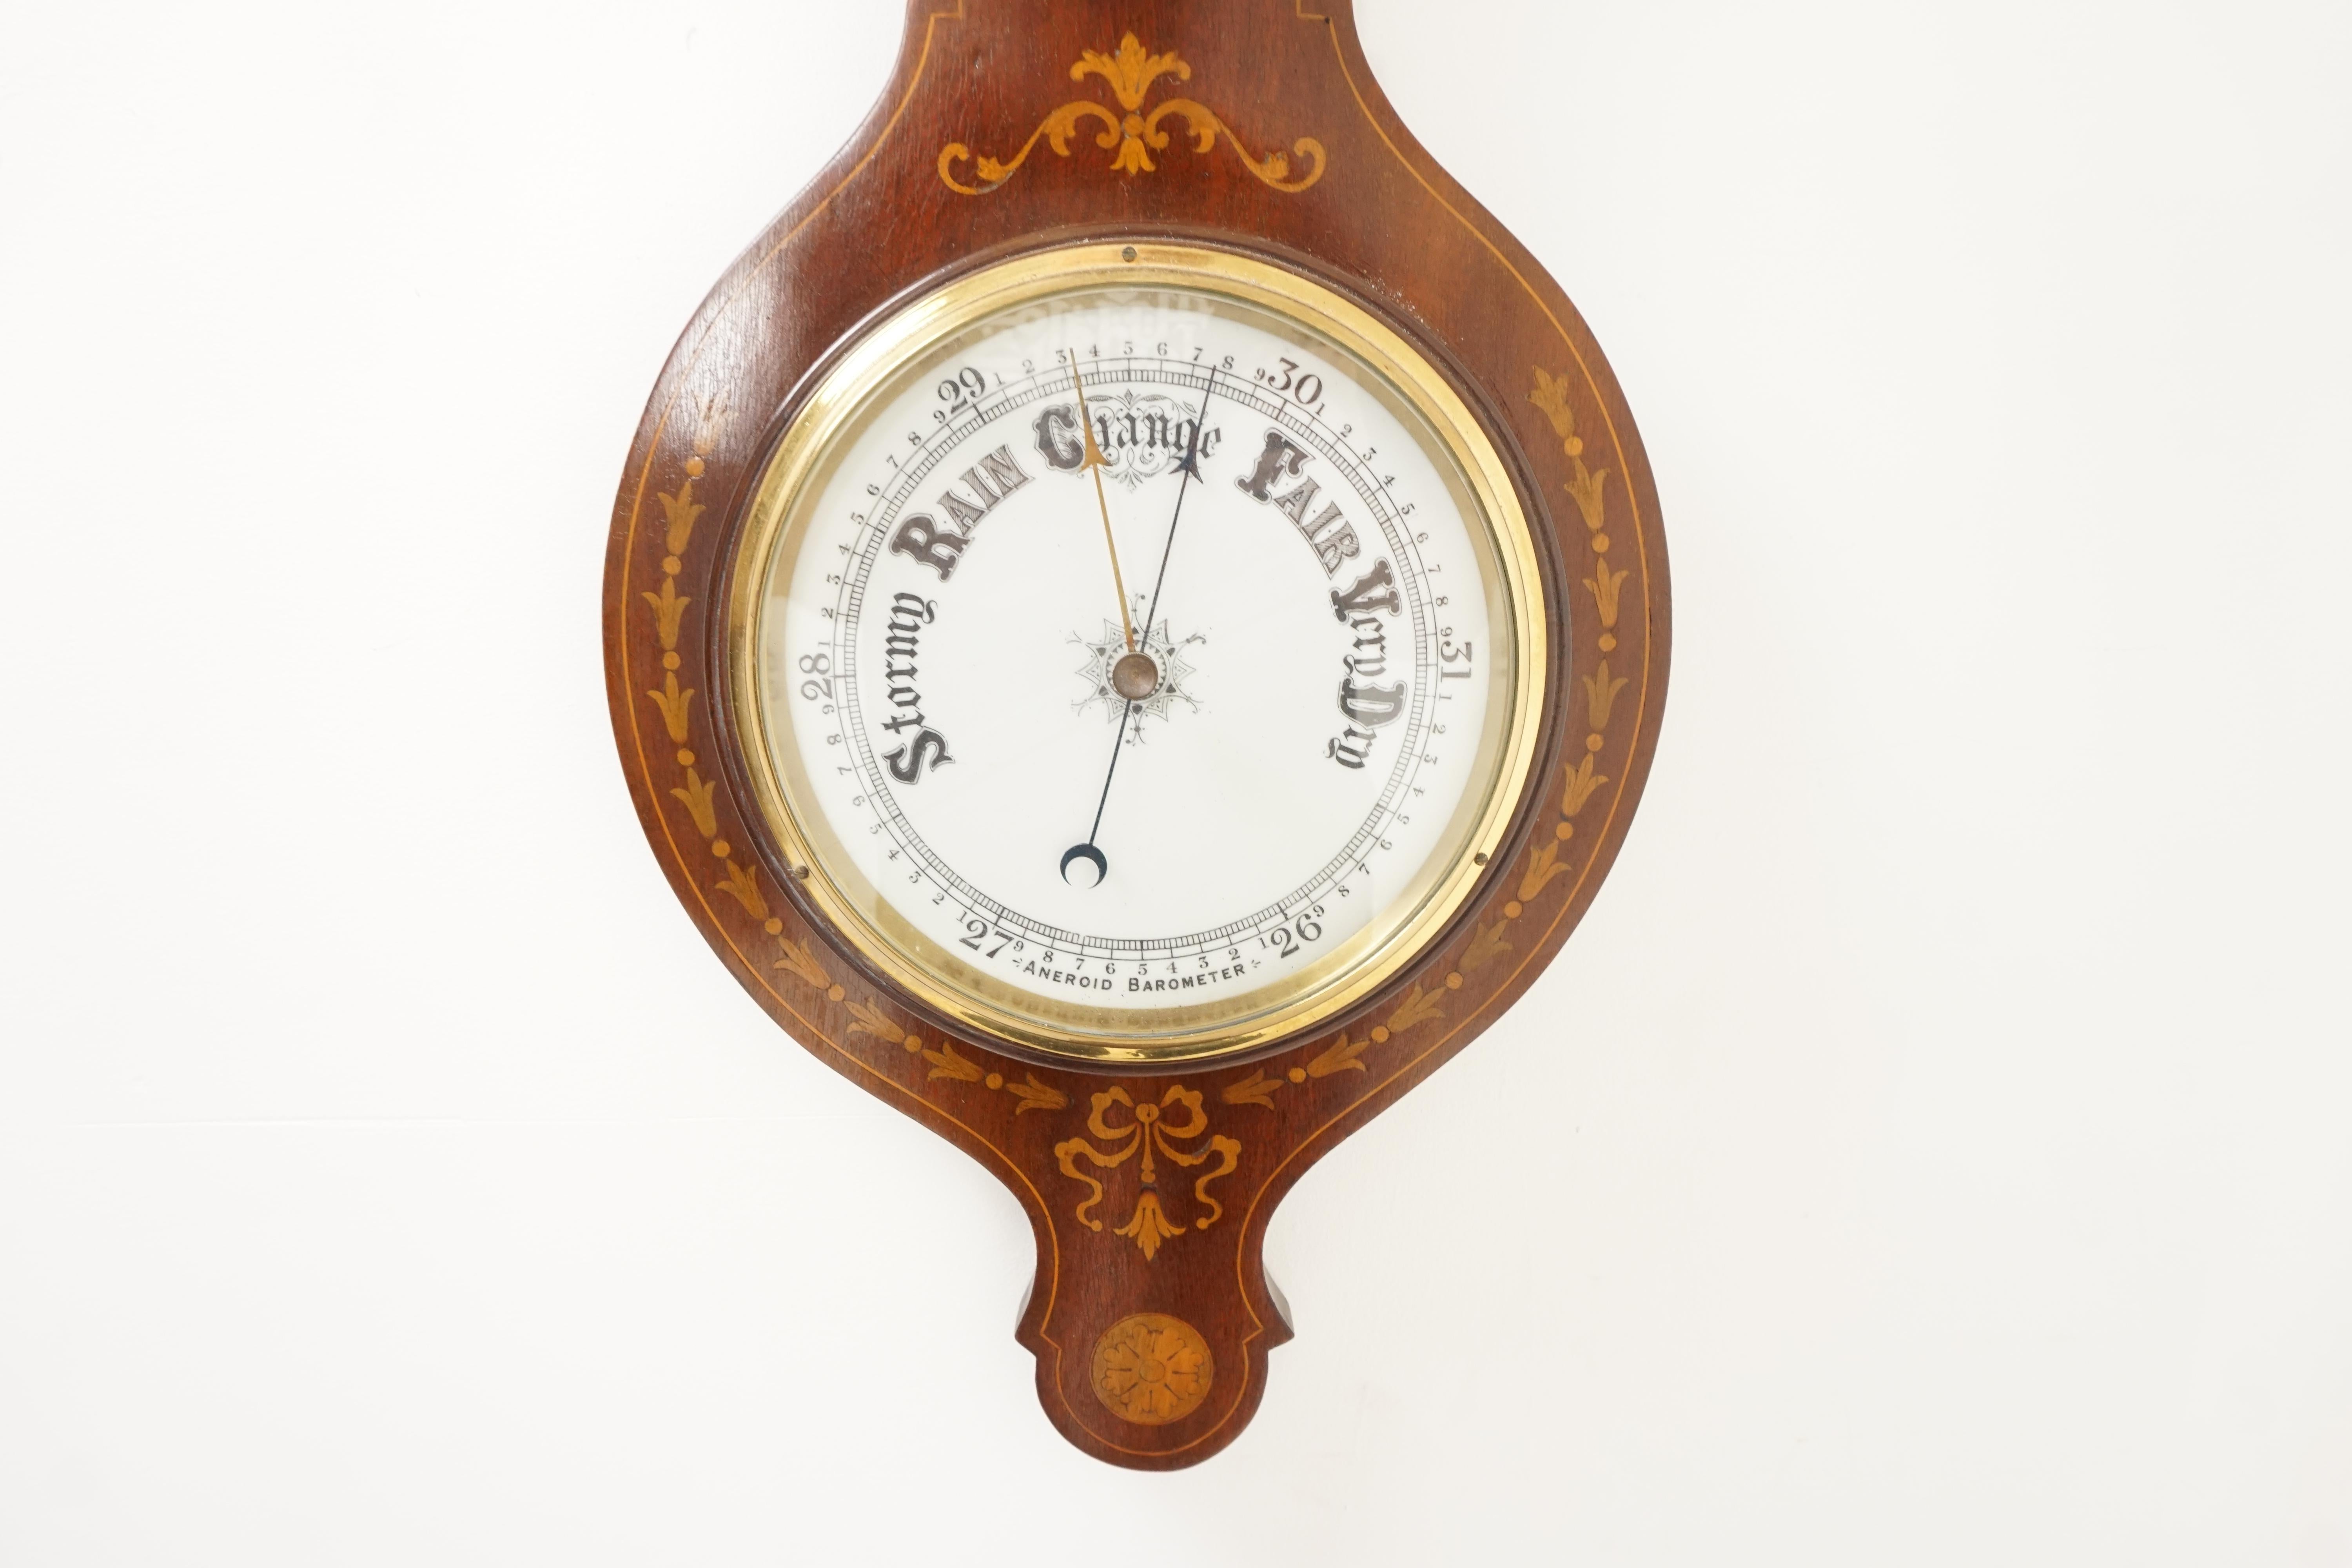 Antique Art Nouveau barometer, Sheraton inlaid aneroid barometer, Scotland 1910, H143

Scotland, 1910
Solid Walnut and veneer
The Walnut case is inlaid with exotic fruitwood
Porcelain dial and brass bezel surround
With matching encased thermometer